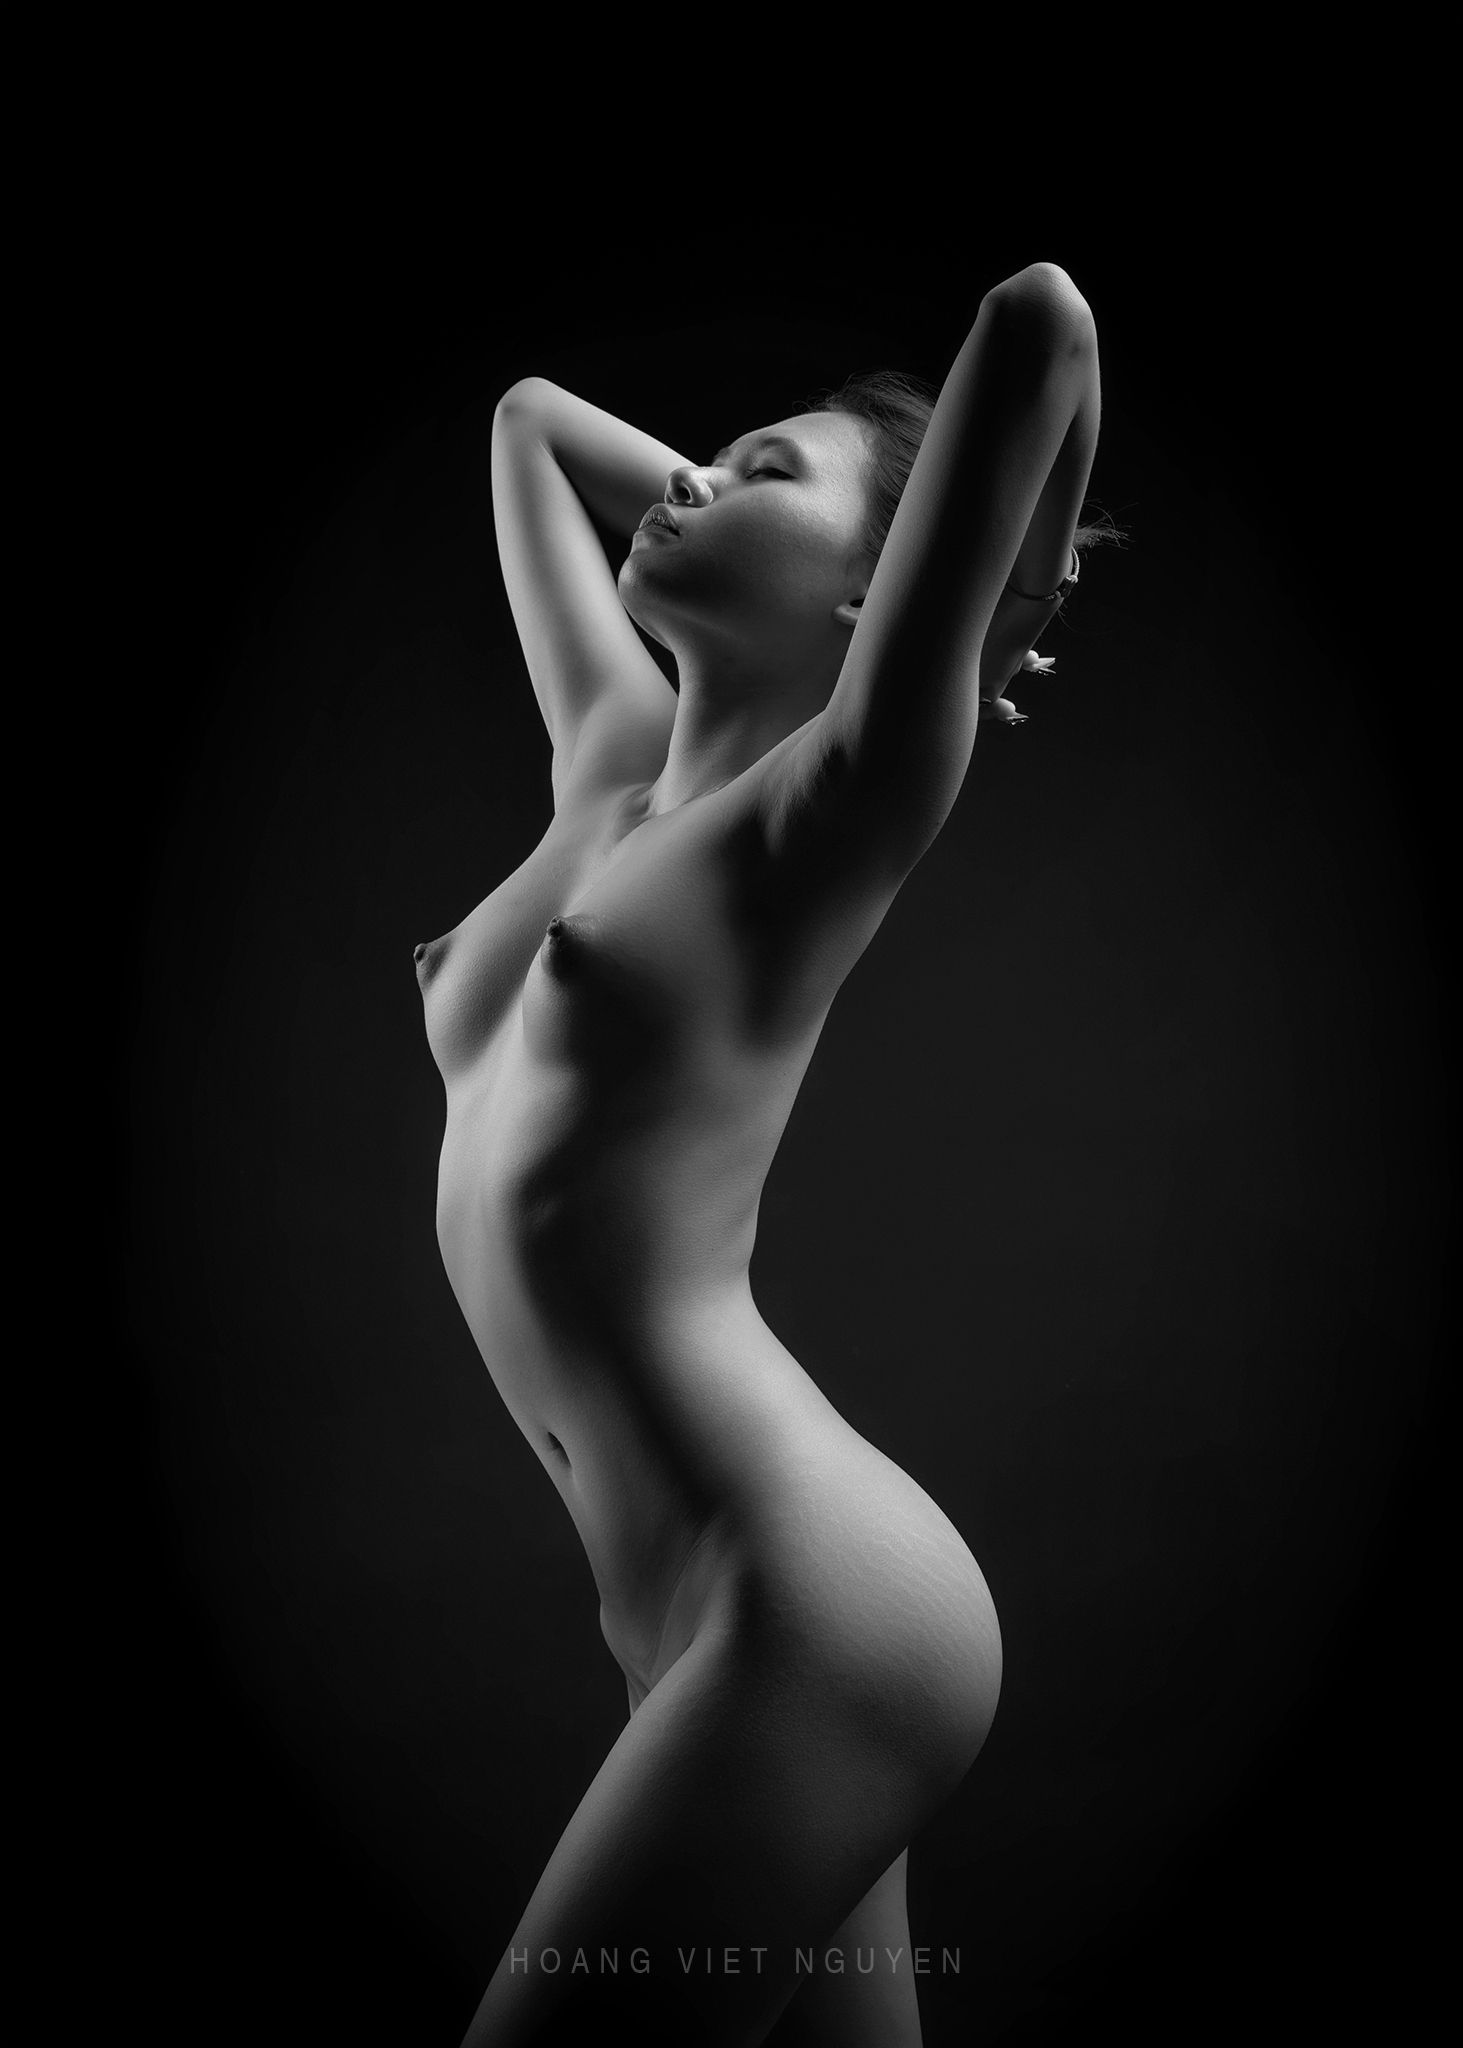 fine nude, nude, glamour, asian, vietnam, vietnamese, body, black and white, bw, bnw, monochrome, Nguyen Hoang Viet